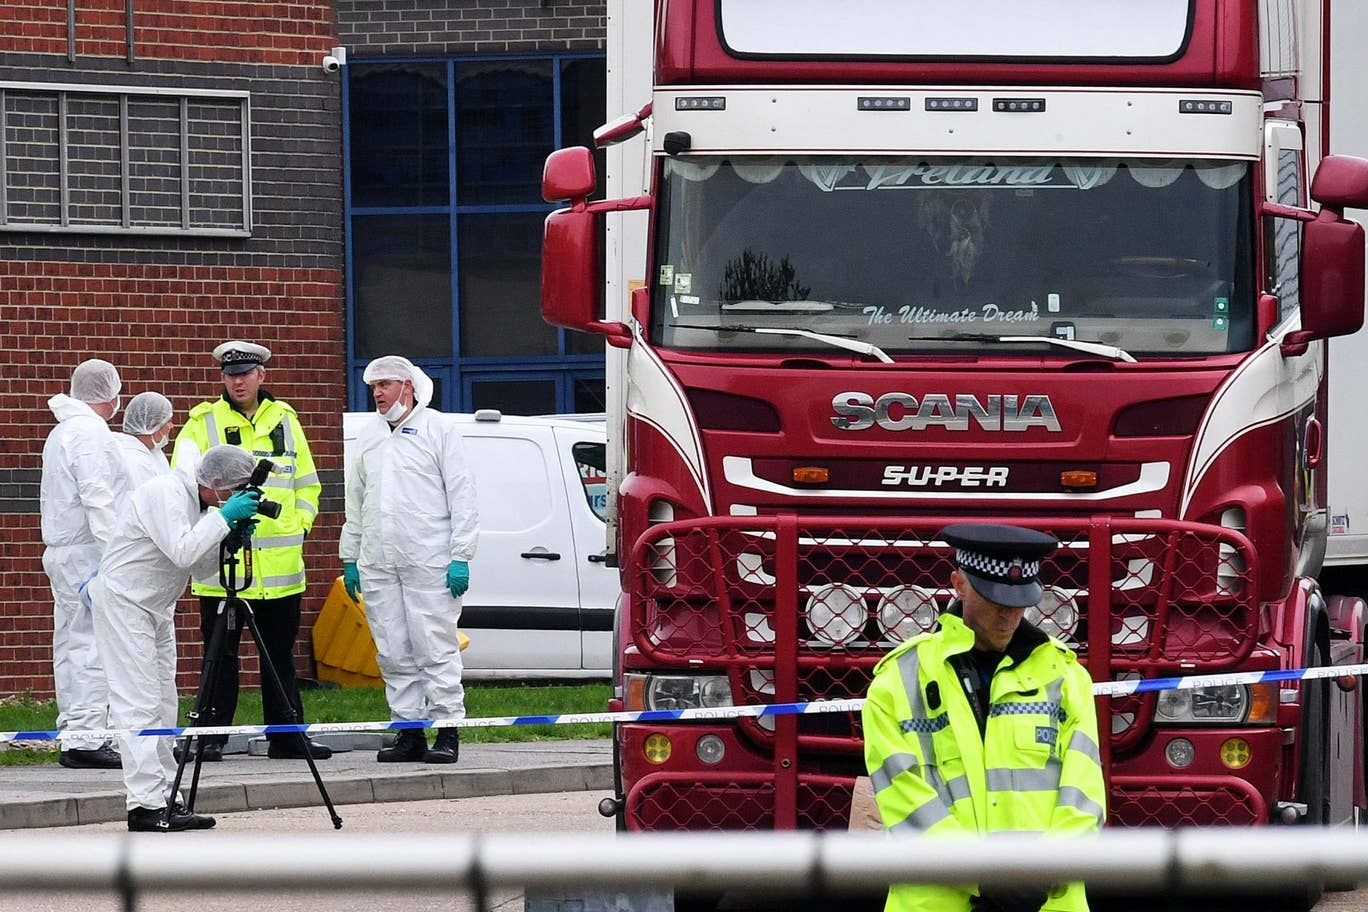 no information on uks support for repatriation of truck death victims spokesperson